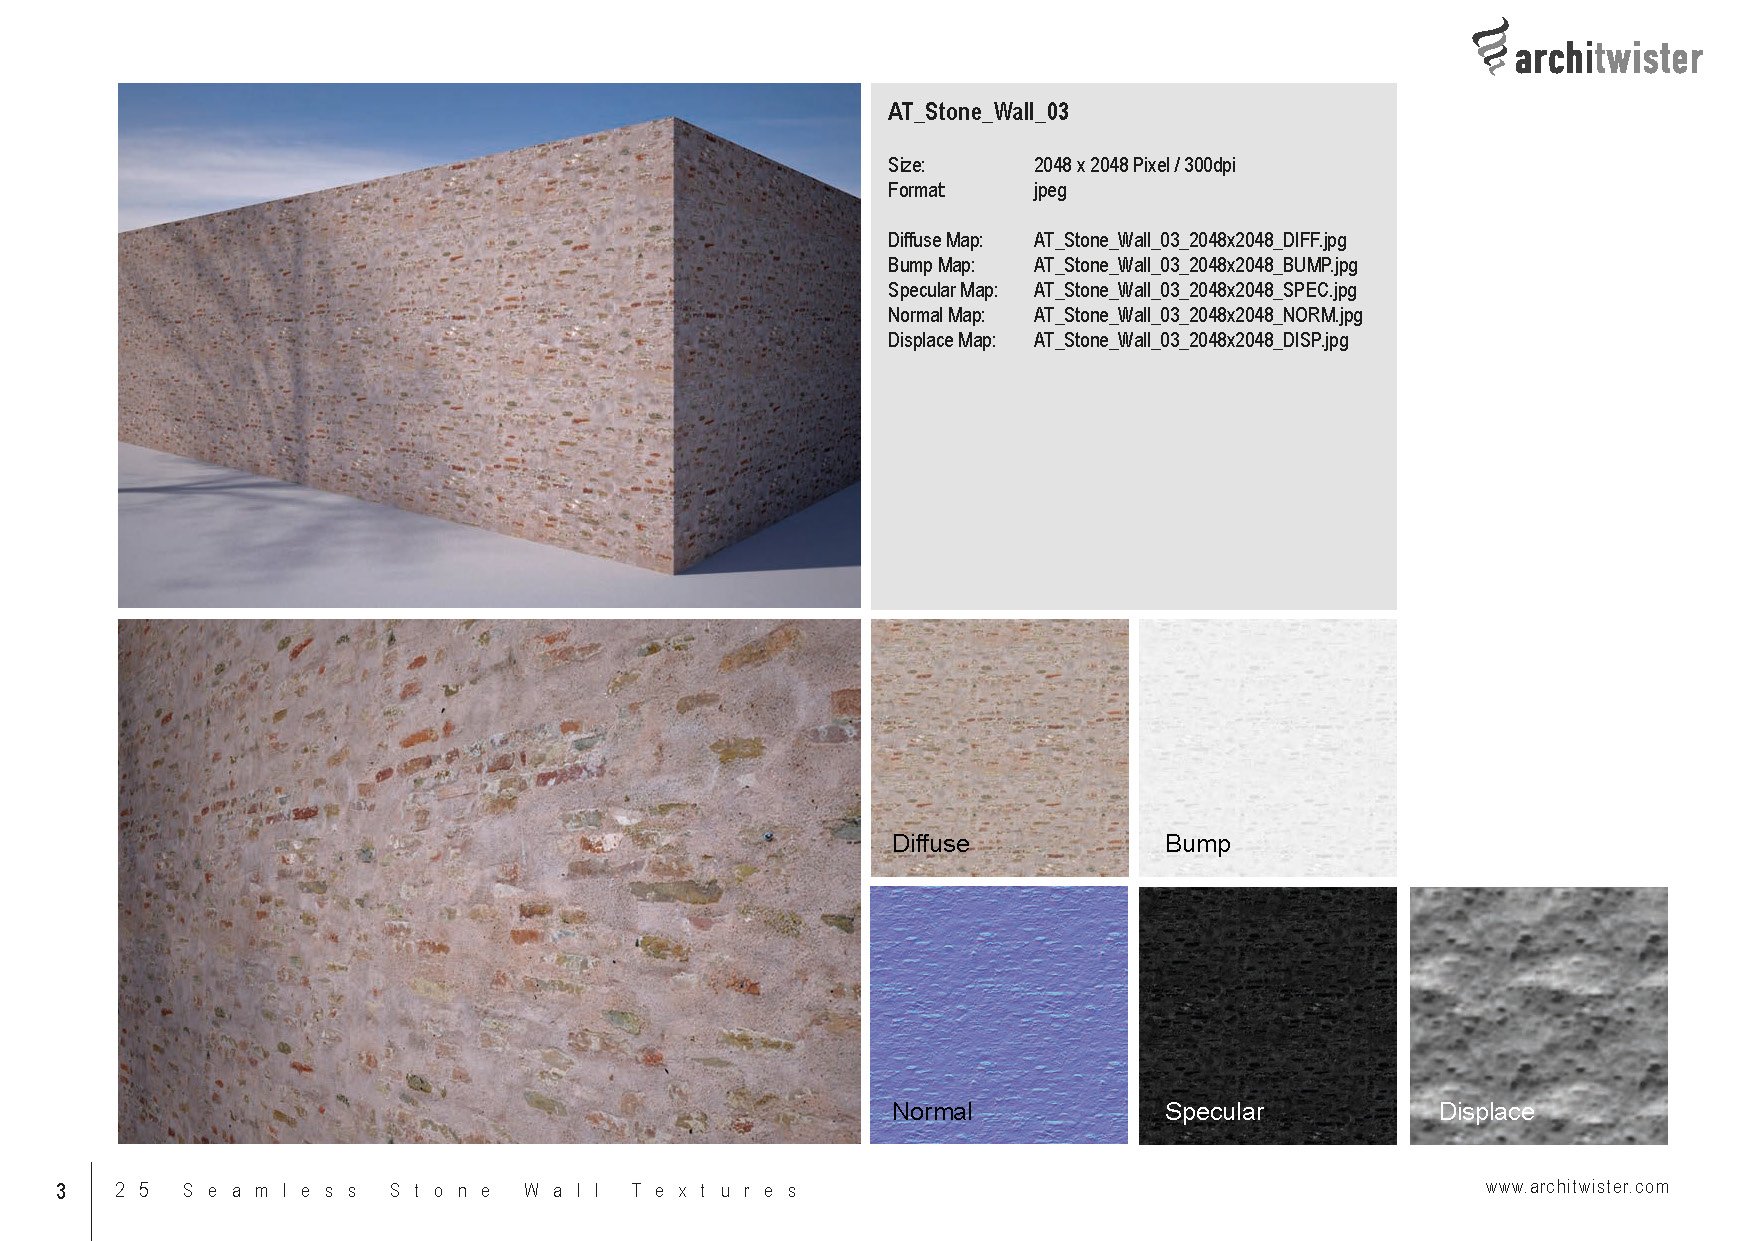 at stone wall textures catalog 01 seite 04 443